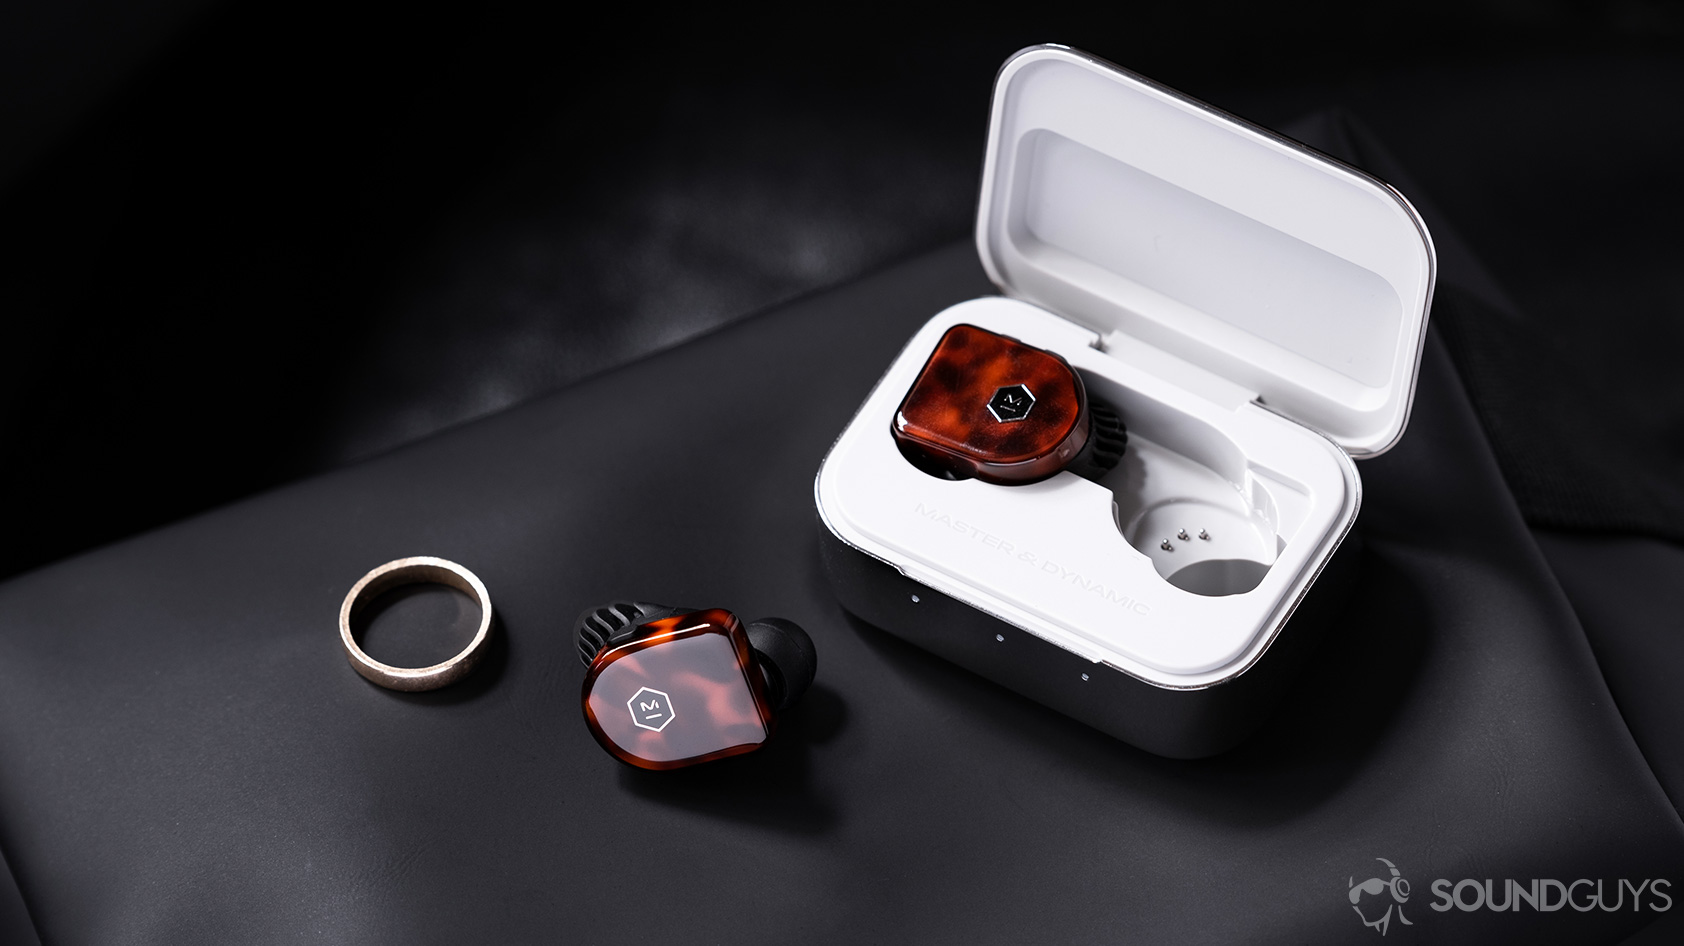 A picture of the Master &amp; Dynamic MW07 Plus noise canceling true wireless earbuds with on earbud in the case and the other outside of it on a leather surface next to a gold ring.